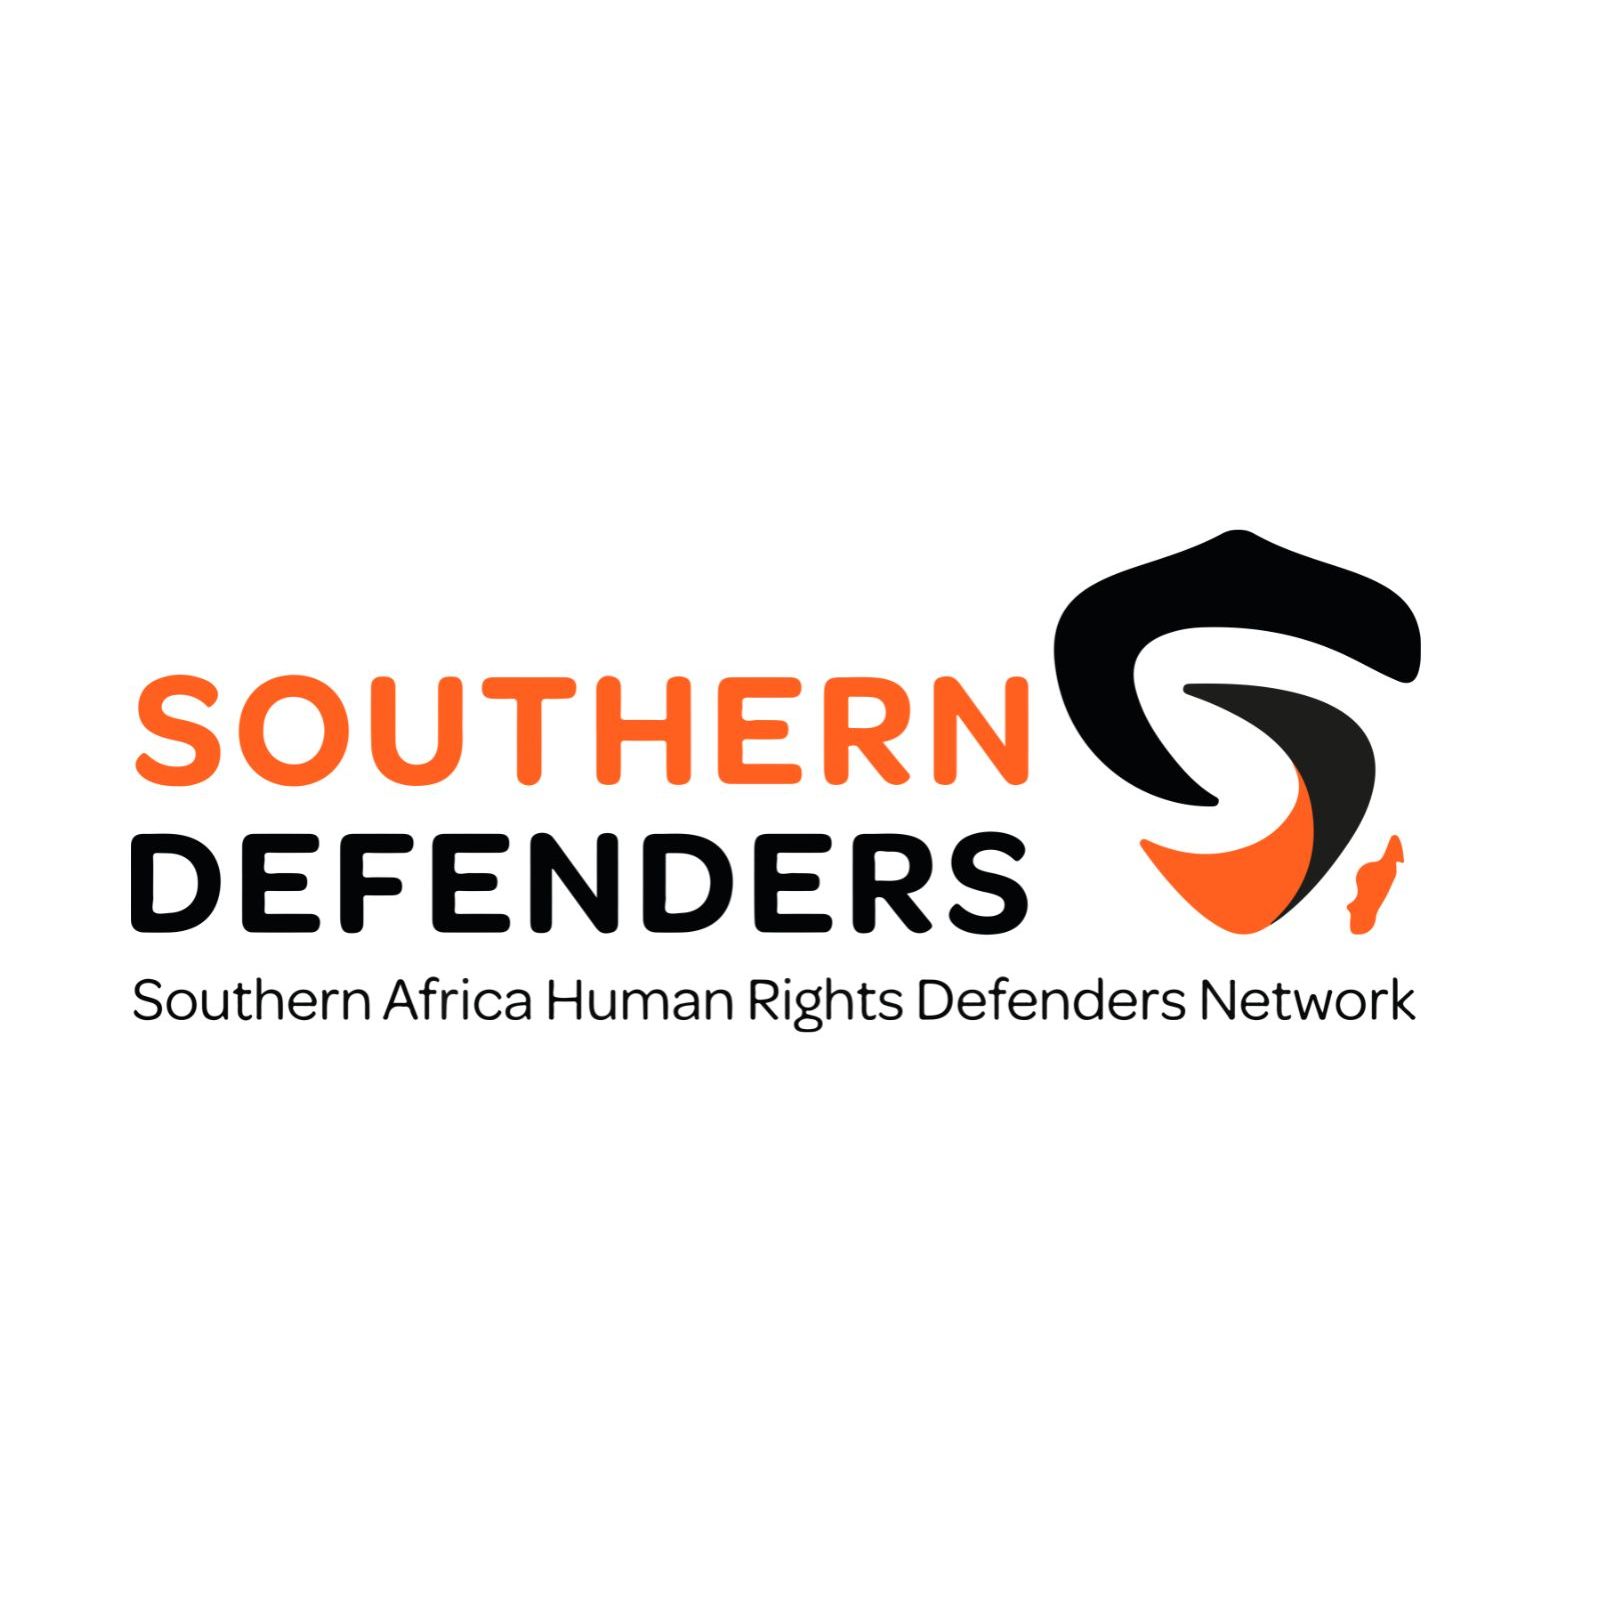 Southern Africa Human Rights Defenders Network (SouthernDefenders)